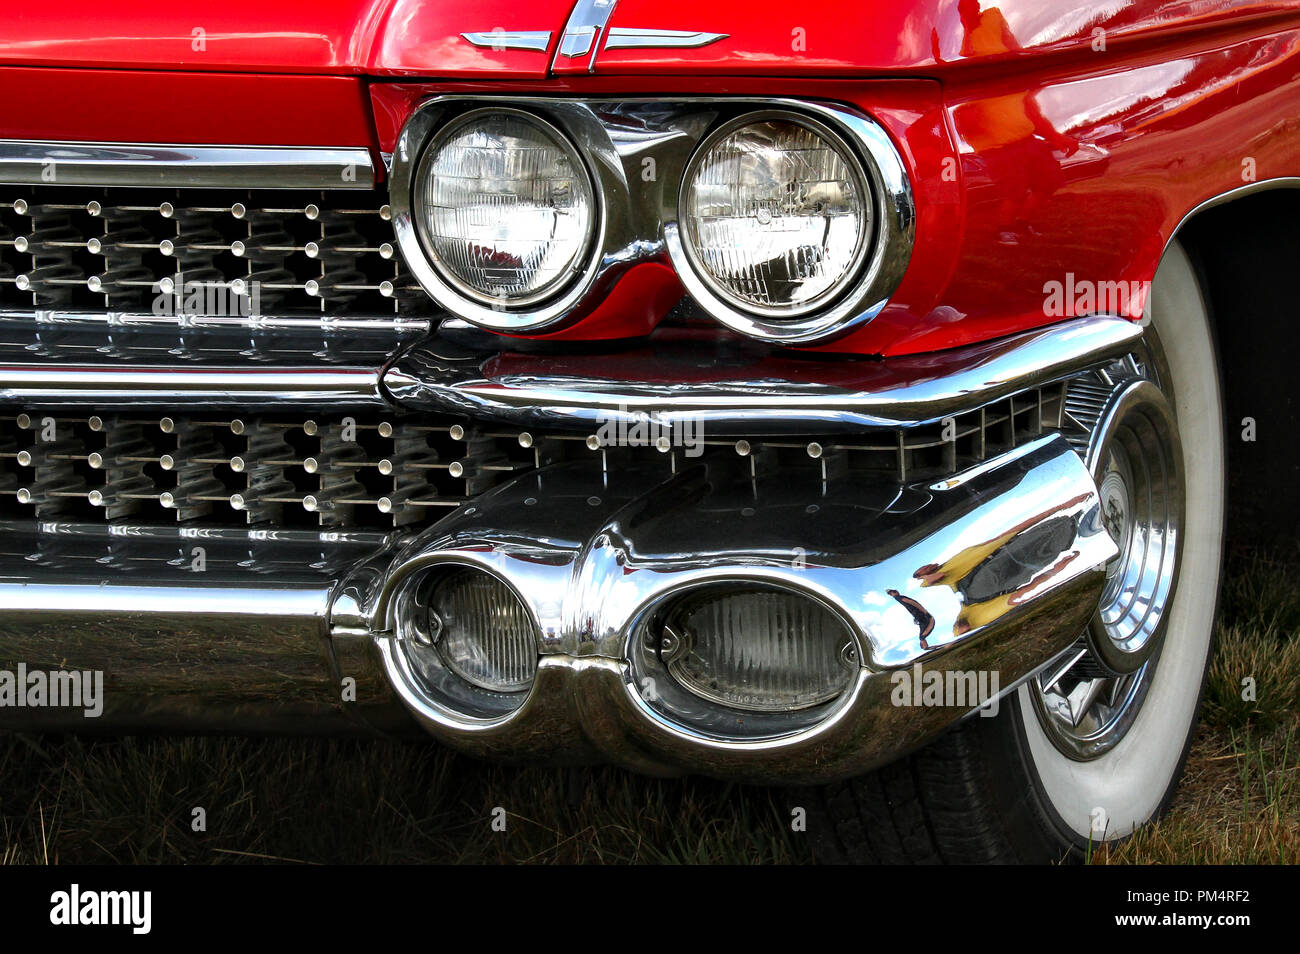 Two pairs of headlights and white wall tires of a shiny classic car Stock Photo